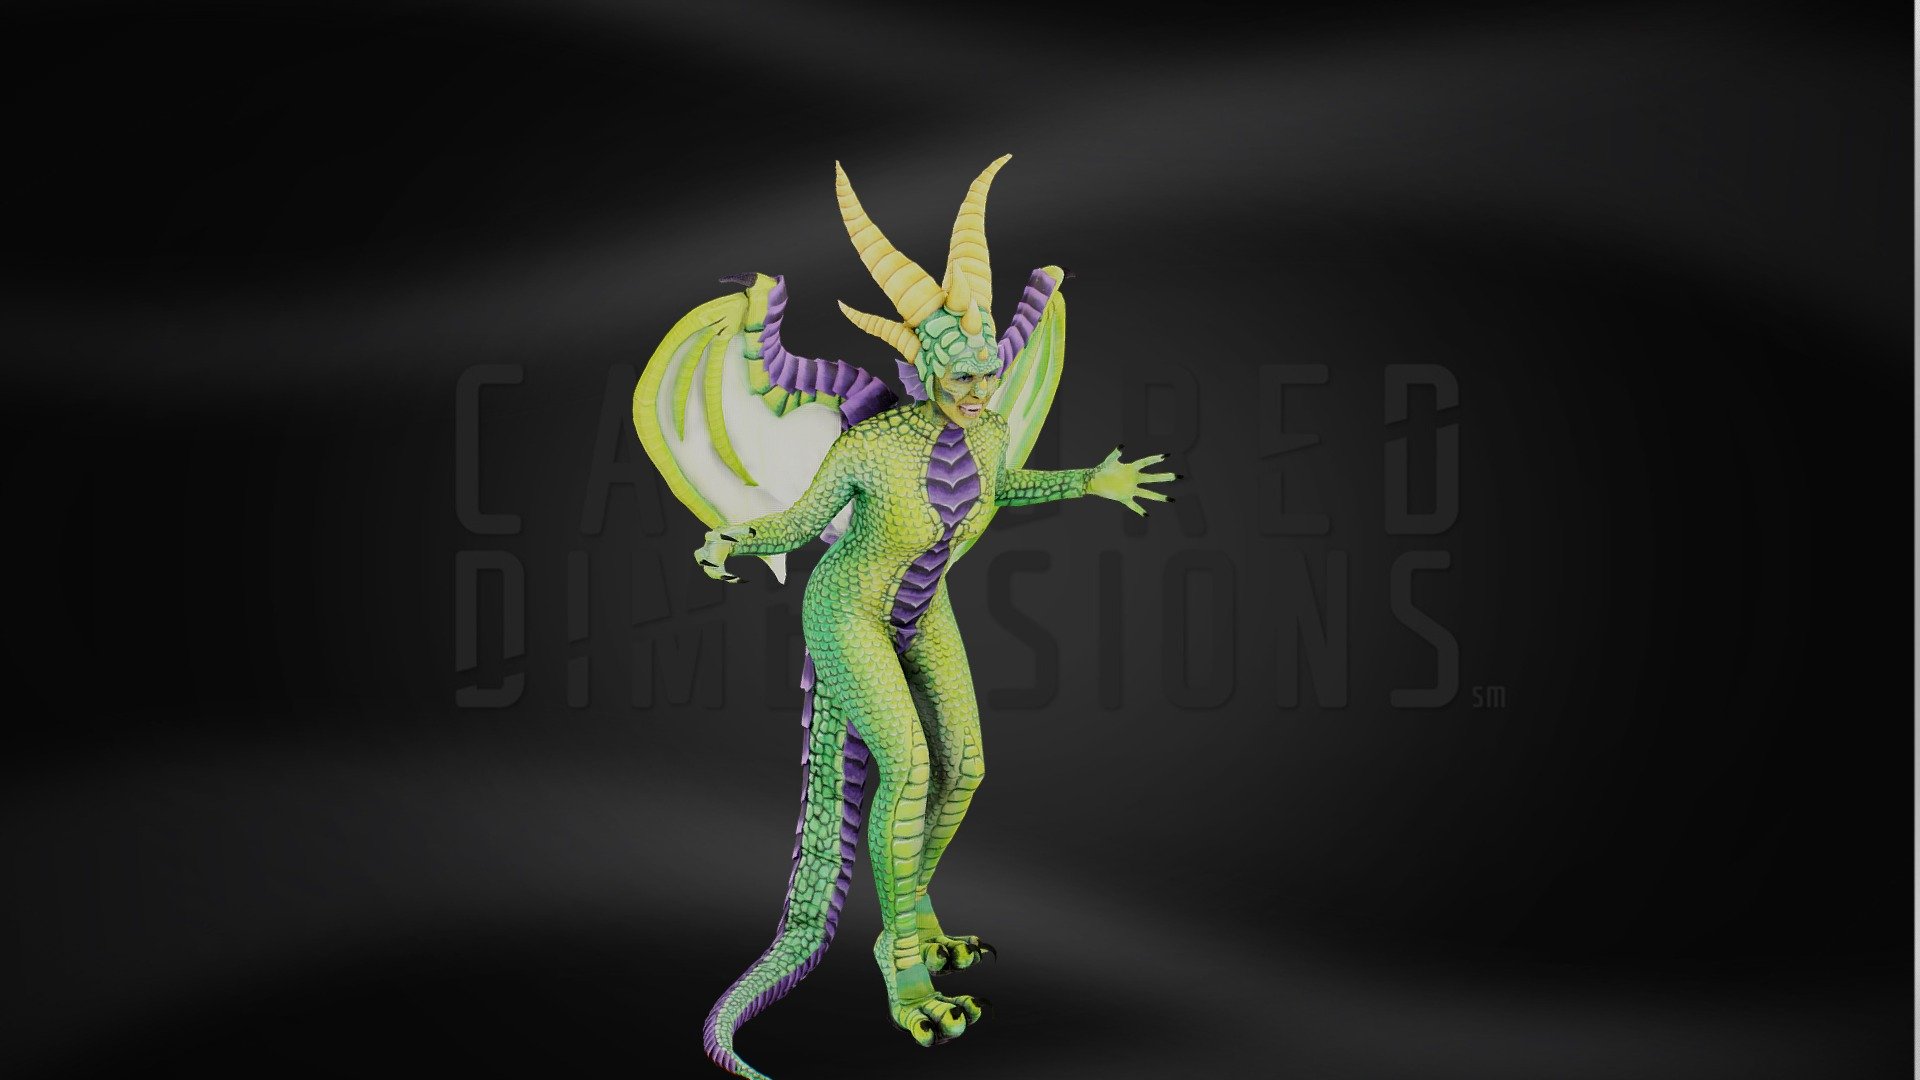 Awesome Green Dragon Cosplay from Dallas Comic Con 2014 - Breanna Cooke - Green Dragon Cosplay - 3D model by captureddimensions 3d model